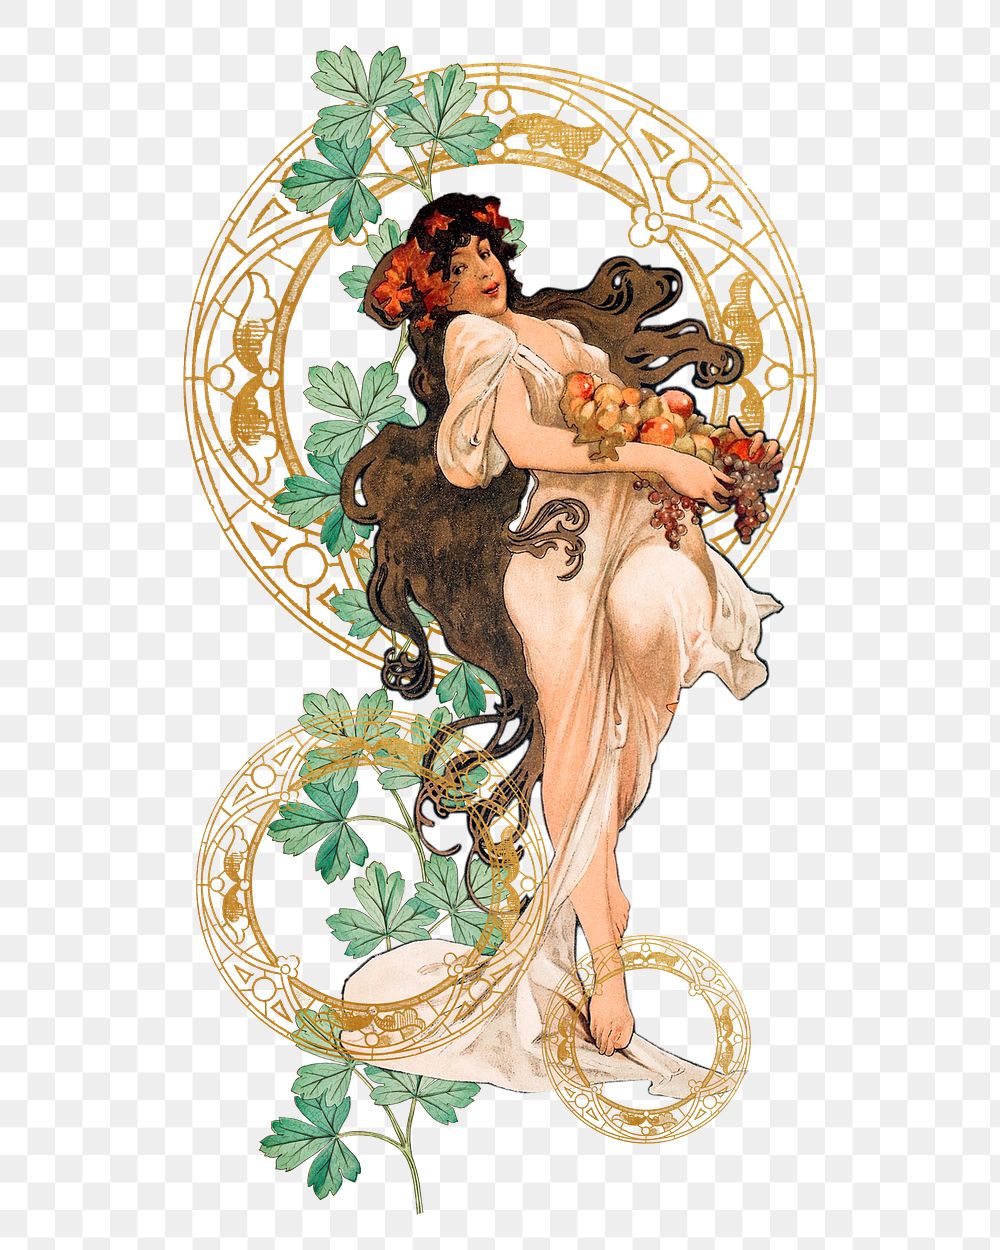 Lady with fruits png sticker, Alphonse Mucha's art nouveau illustration on transparent background, remixed by rawpixel